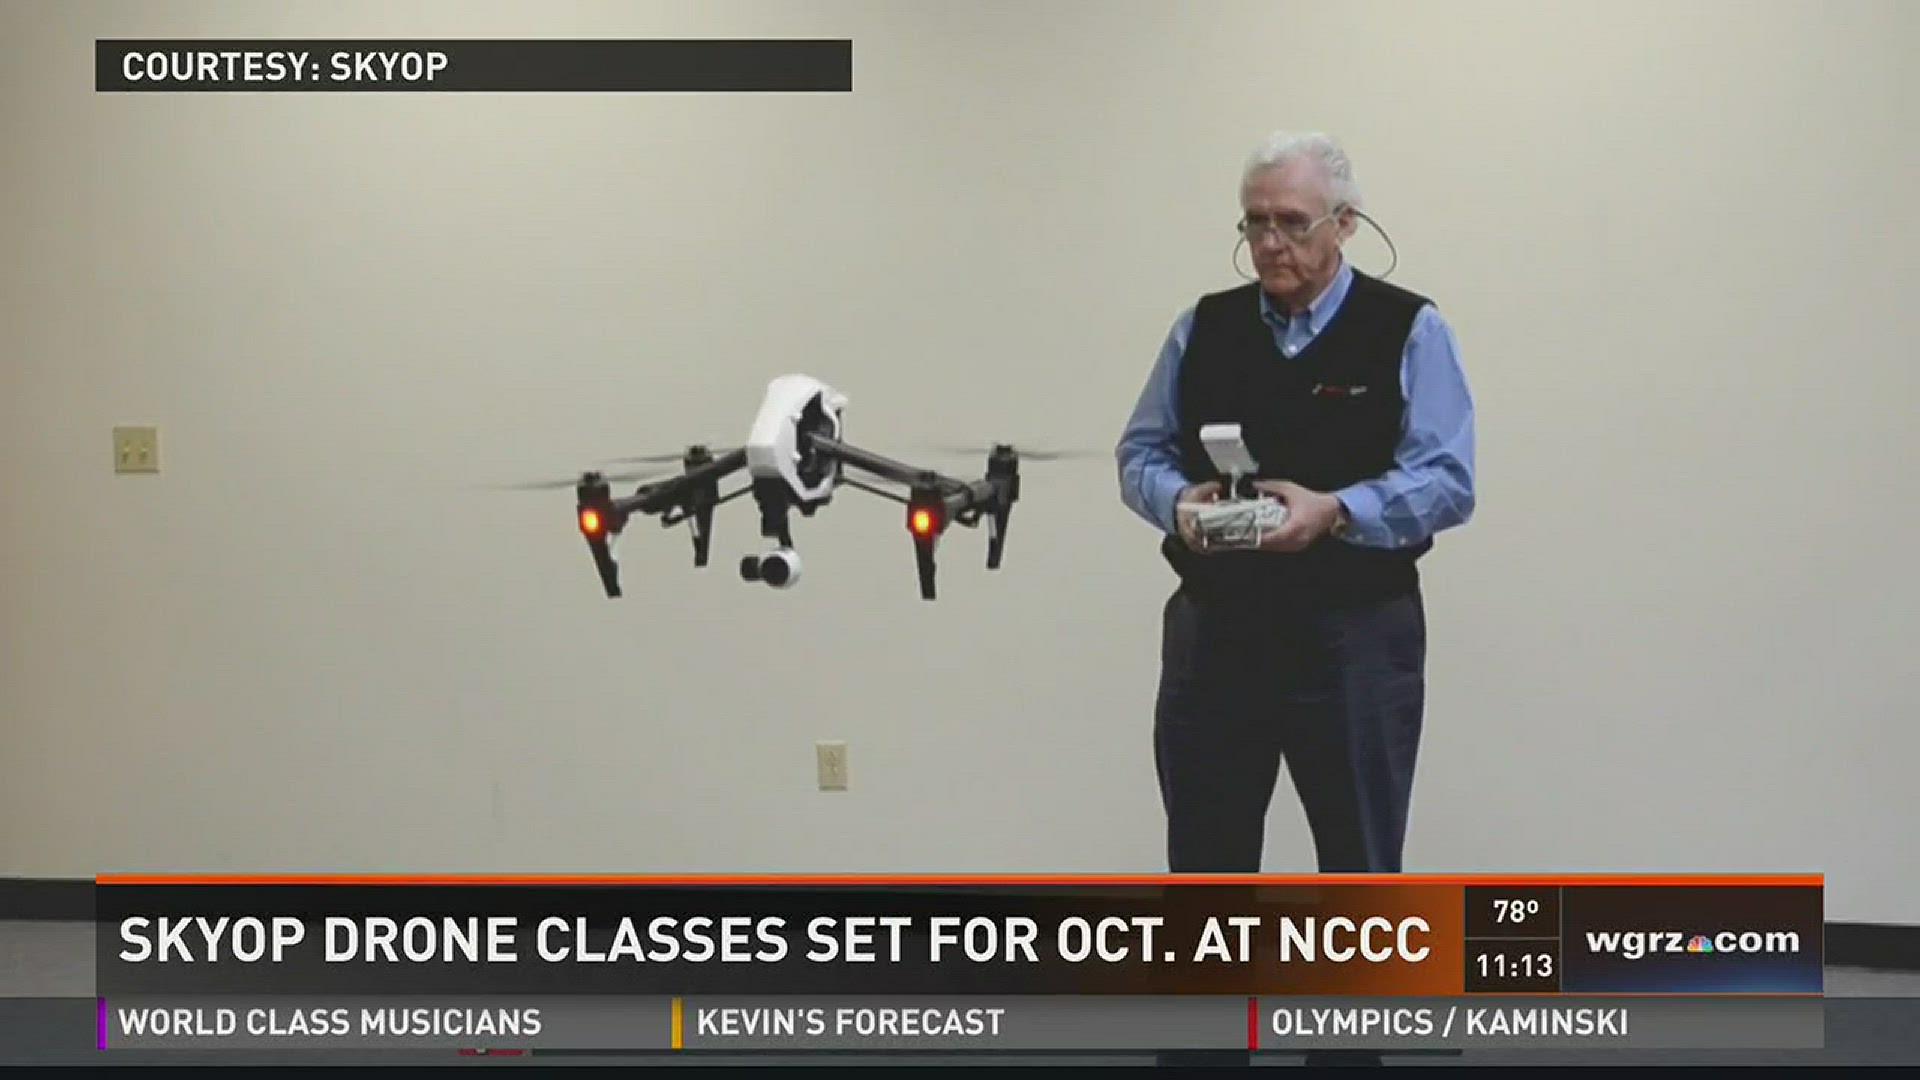 SKYOP DRONE CLASSES SET FOR OCTOBER AT NCCC